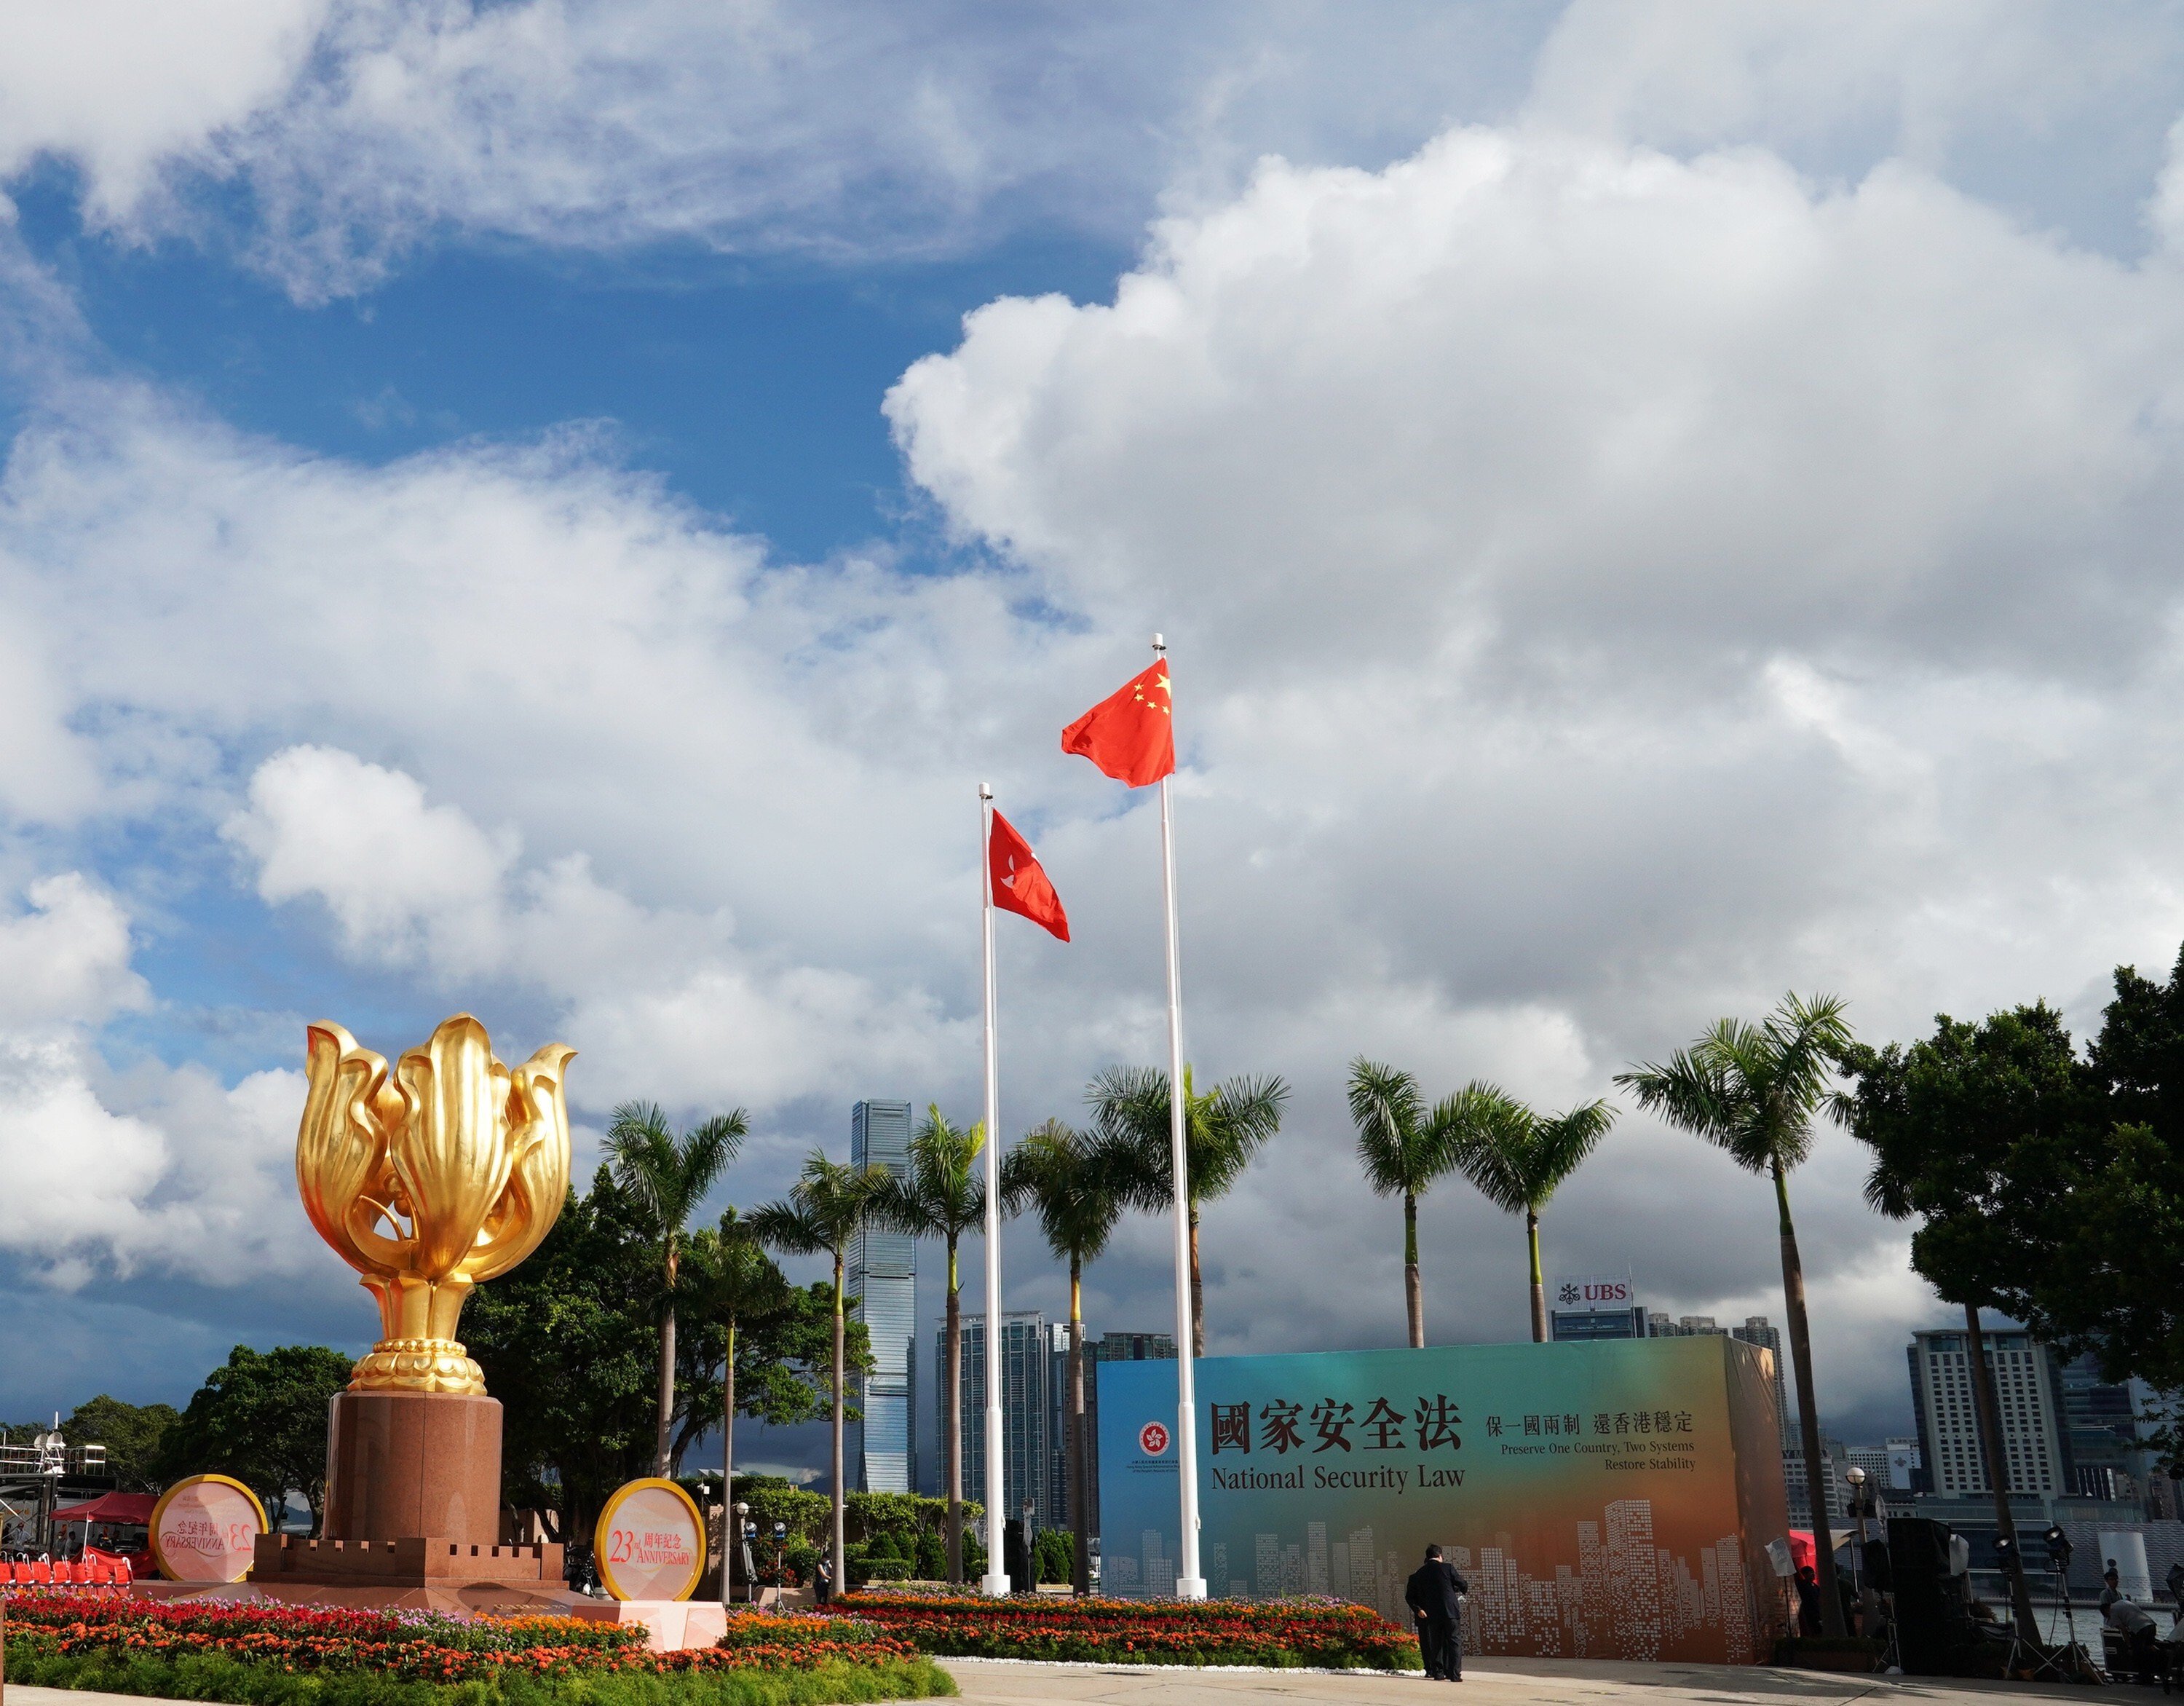 The Golden Bauhinia Square in Hong Kong, seen on July 1 last year. Beijing imposed a national security law on Hong Kong on June 30, which some saw as marking the end of Hong Kong’s high degree of autonomy. Photo: Xinhua